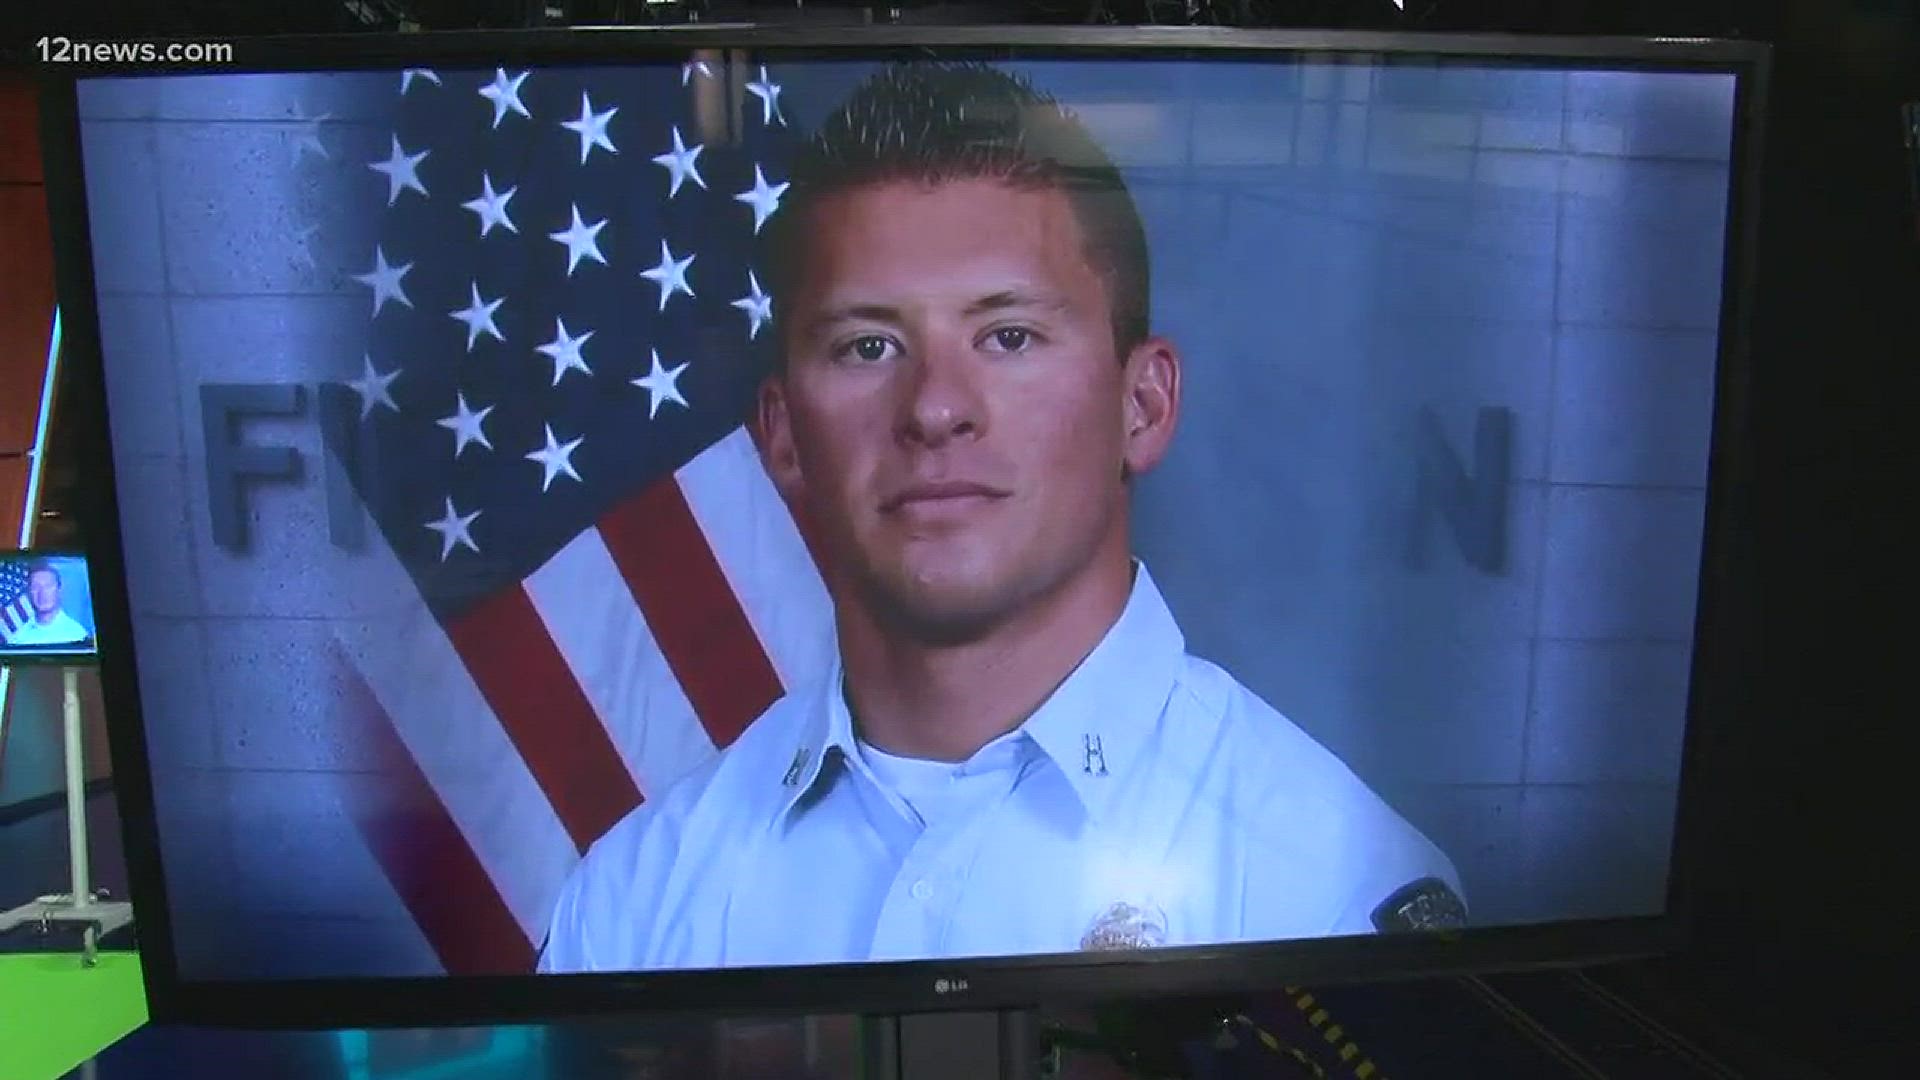 Colleagues, family and friends came together to remember Capt. Kyle Brayer Friday morning.